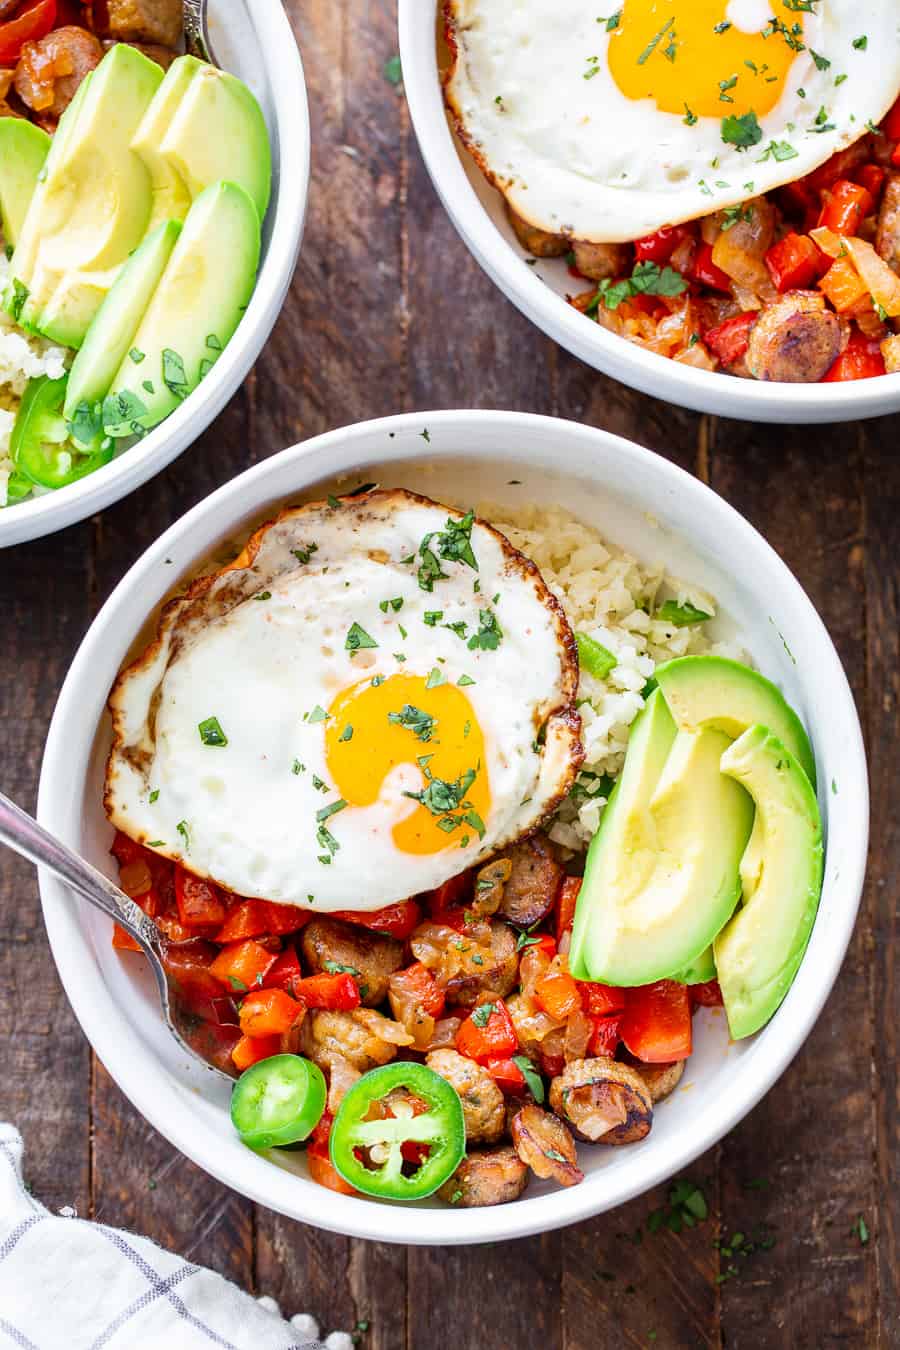 These Paleo breakfast burrito bowls are loaded with goodies!  Savory No Antibiotics Ever All Natural Golden Brown Chicken Sausage, peppers, onions, and seasoned cauliflower rice topped with sliced avocado and eggs. These delicious breakfast bowls are low carb, Whole30 compliant and super easy to throw together!